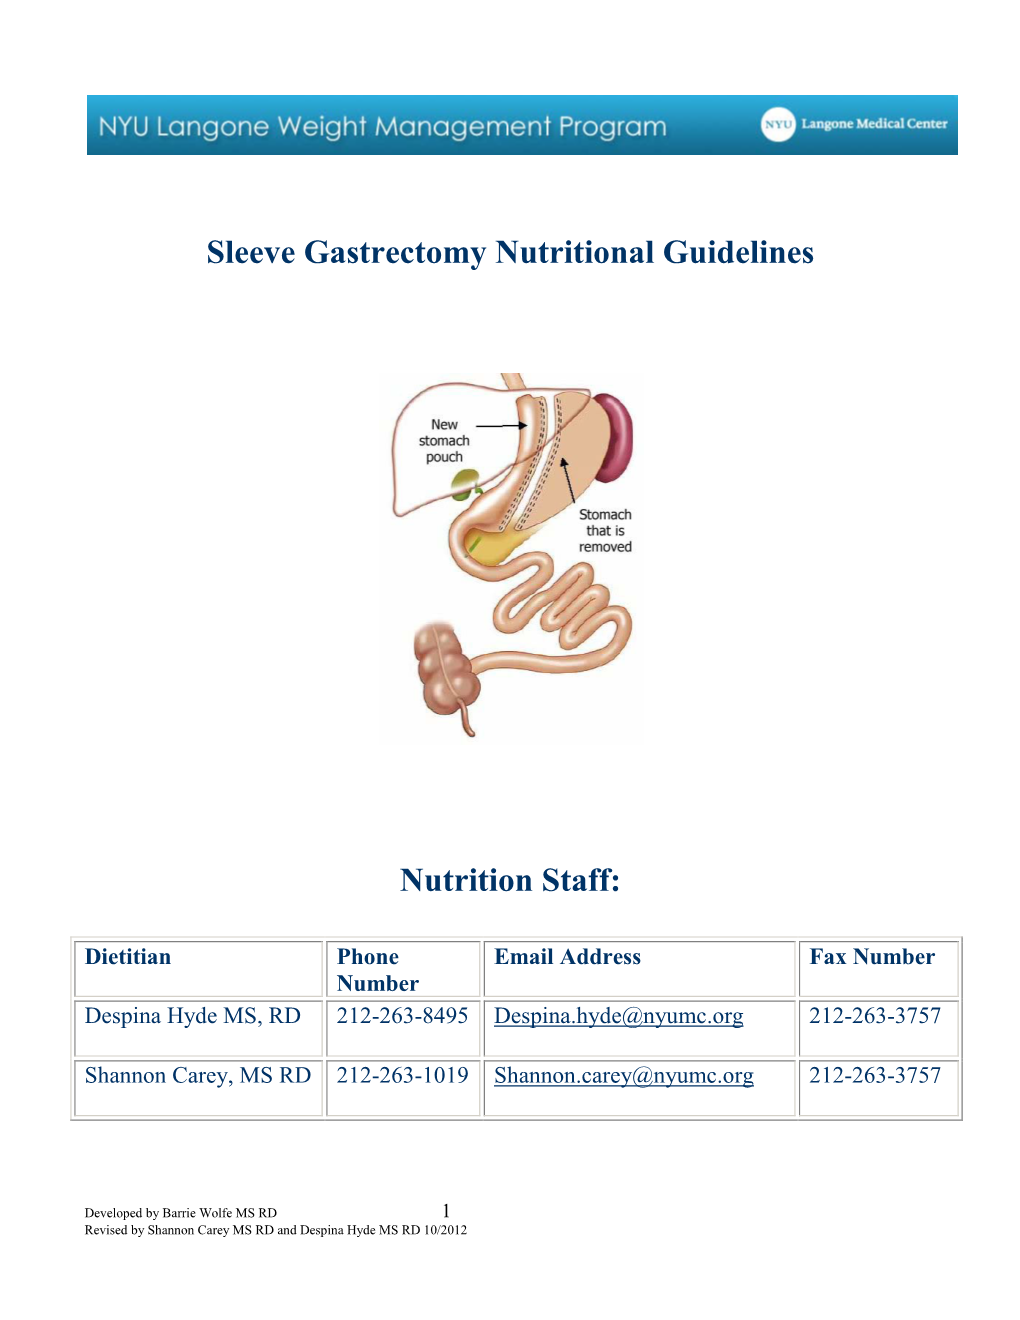 Sleeve Gastrectomy Nutritional Guidelines Nutrition Staff